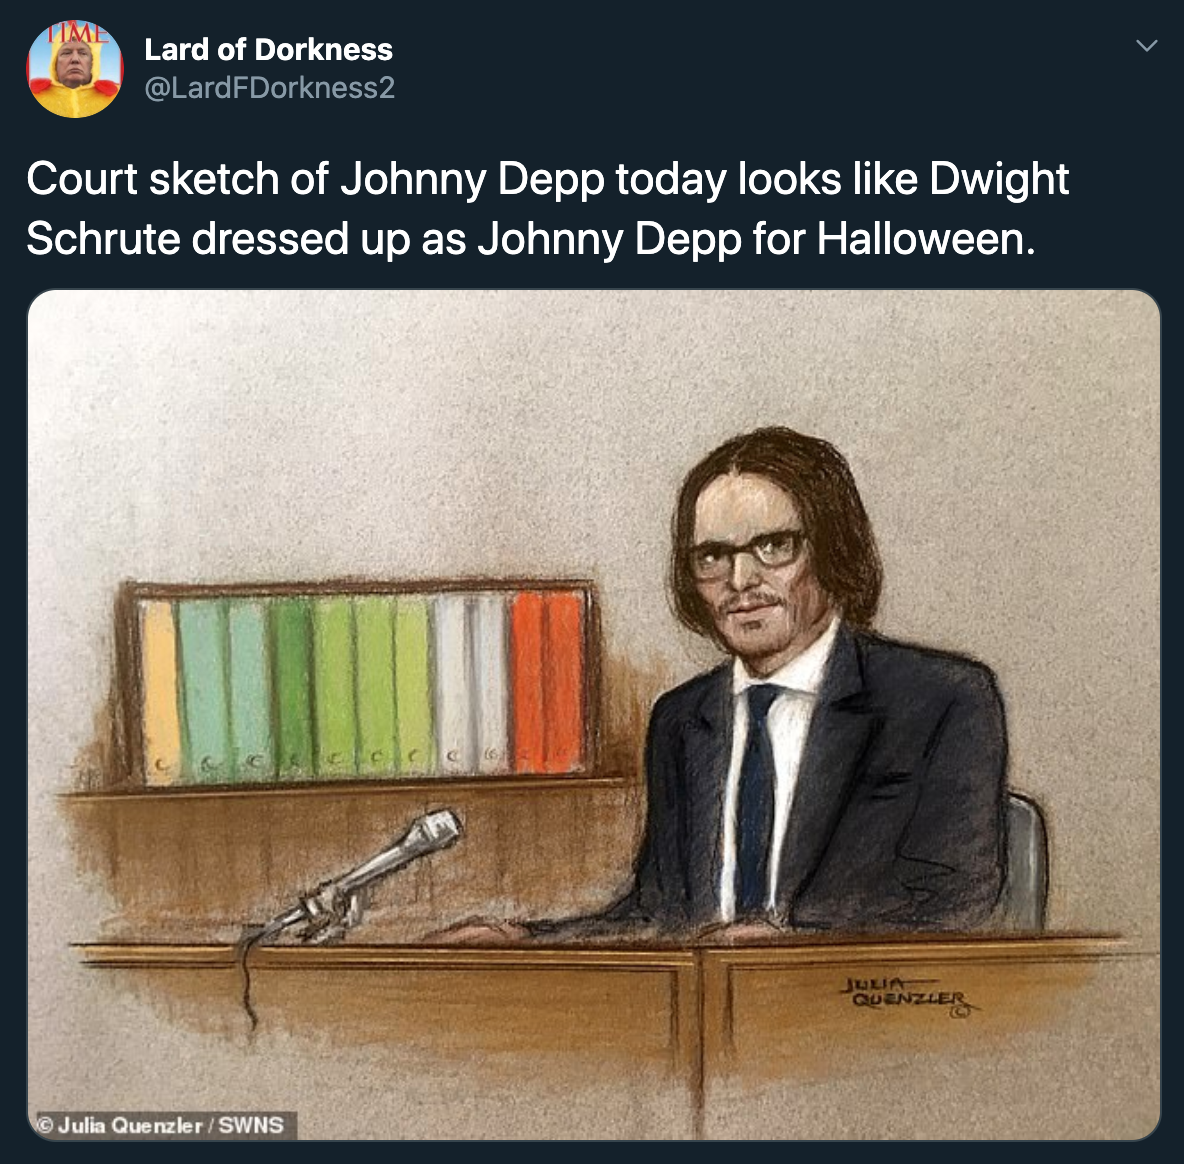 Court sketch of Johnny Depp today looks Dwight Schrute dressed up as Johnny Depp for Halloween.